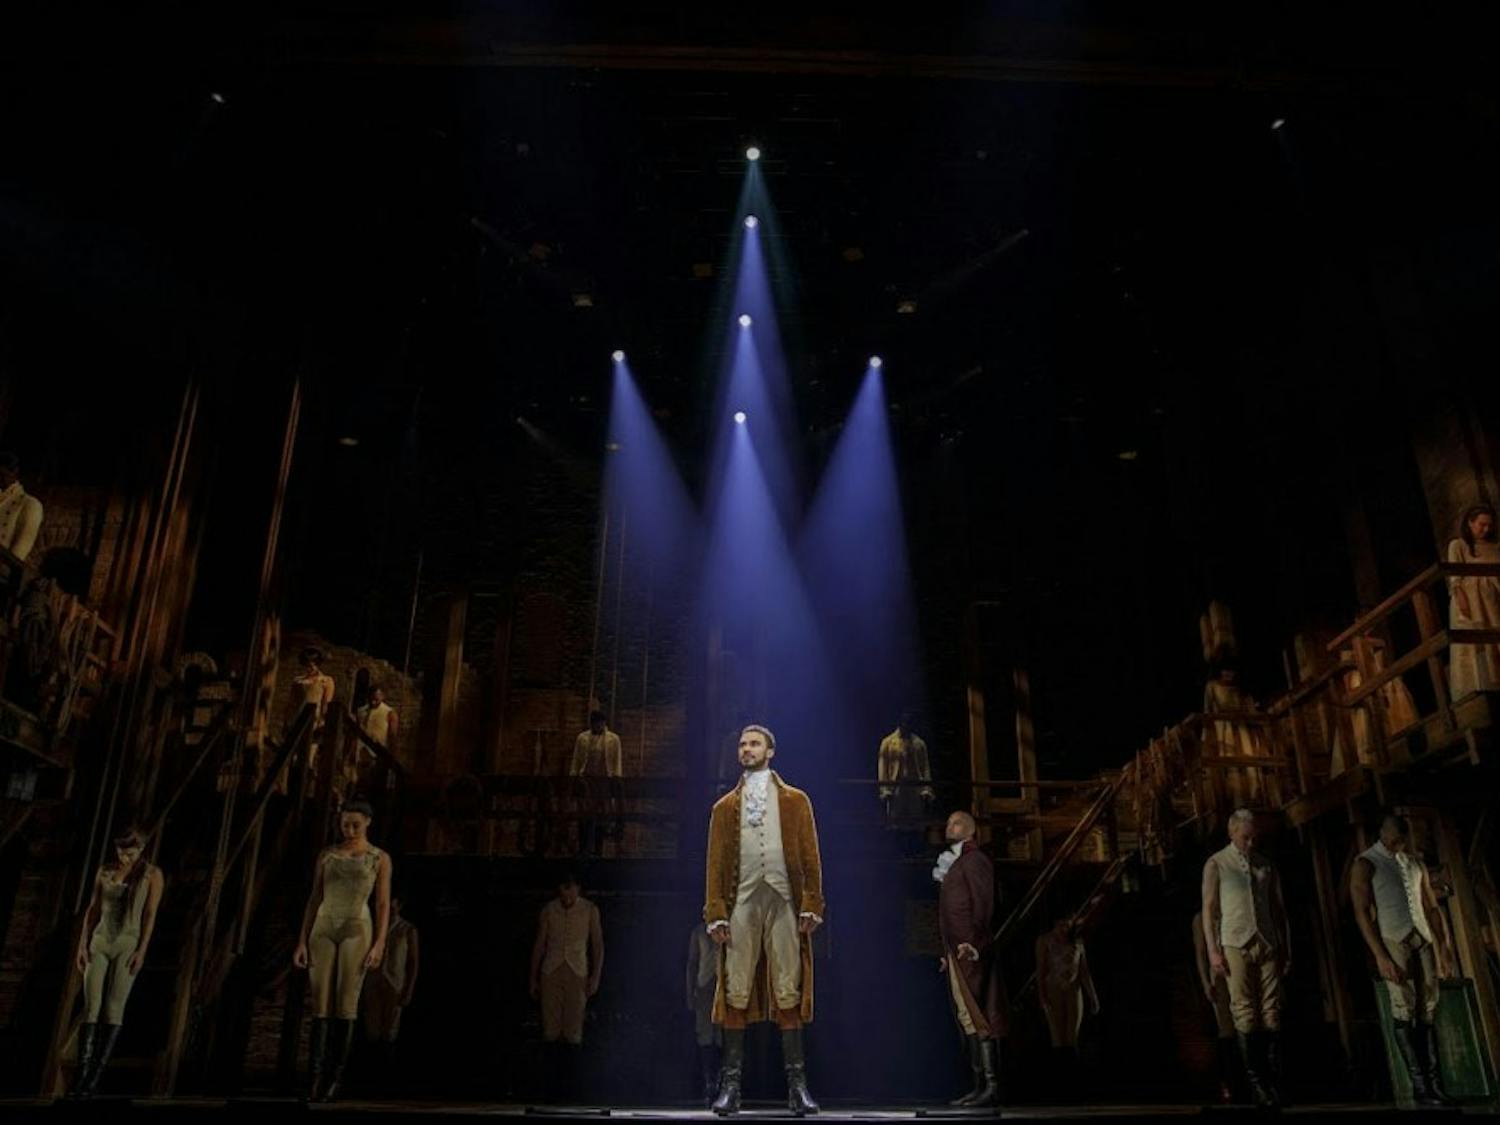 The cast of “Hamilton” is taking Buffalo by storm at Shea’s Performing Arts Center. Last week, the cast performed their Broadway smashes in front of a sold-out and raving audience.